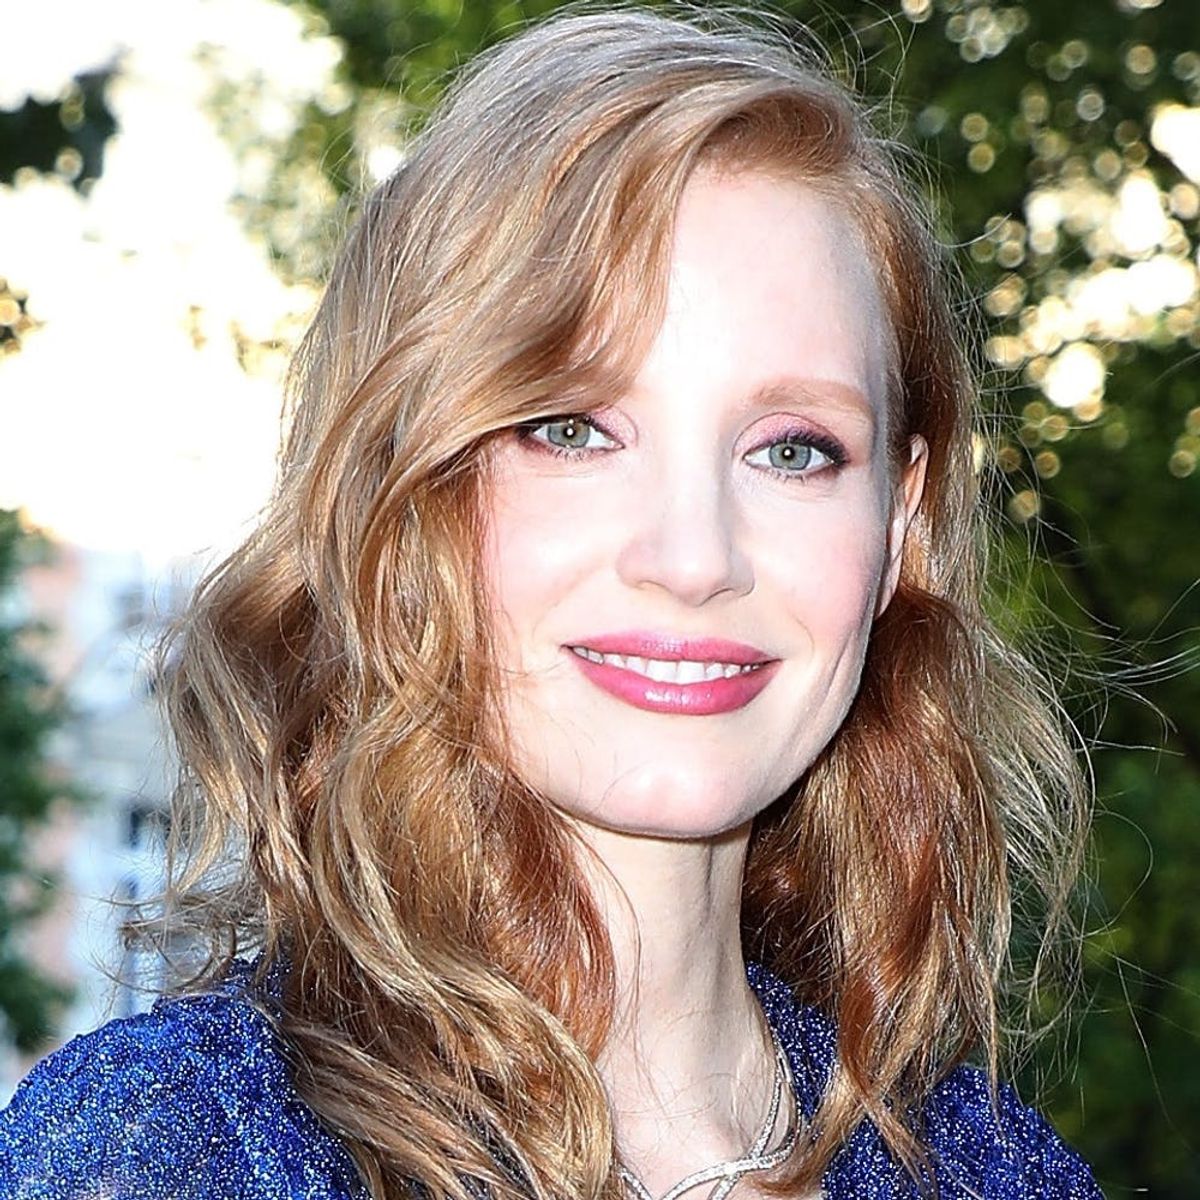 You Can Finally Tell Jessica Chastain and Bryce Dallas Howard Apart Thanks to This Dramatic Haircut